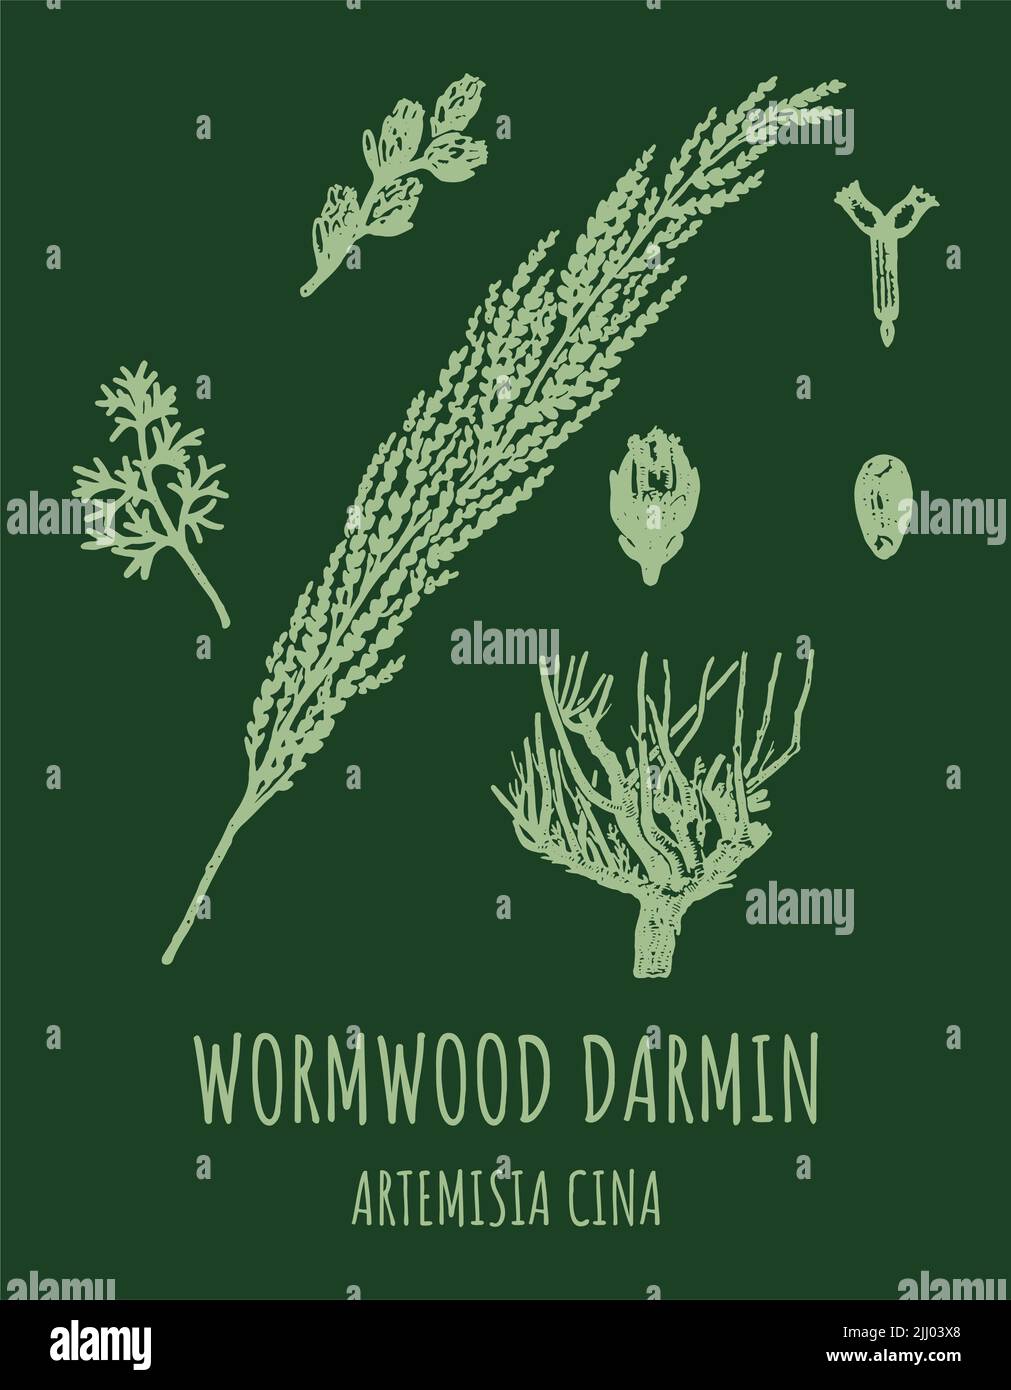 DARMIN Wormwood (Artemisia cina) illustration. Wormwood branch, leaves and wormwood flowers. Cosmetics and medical plant. Stock Photo